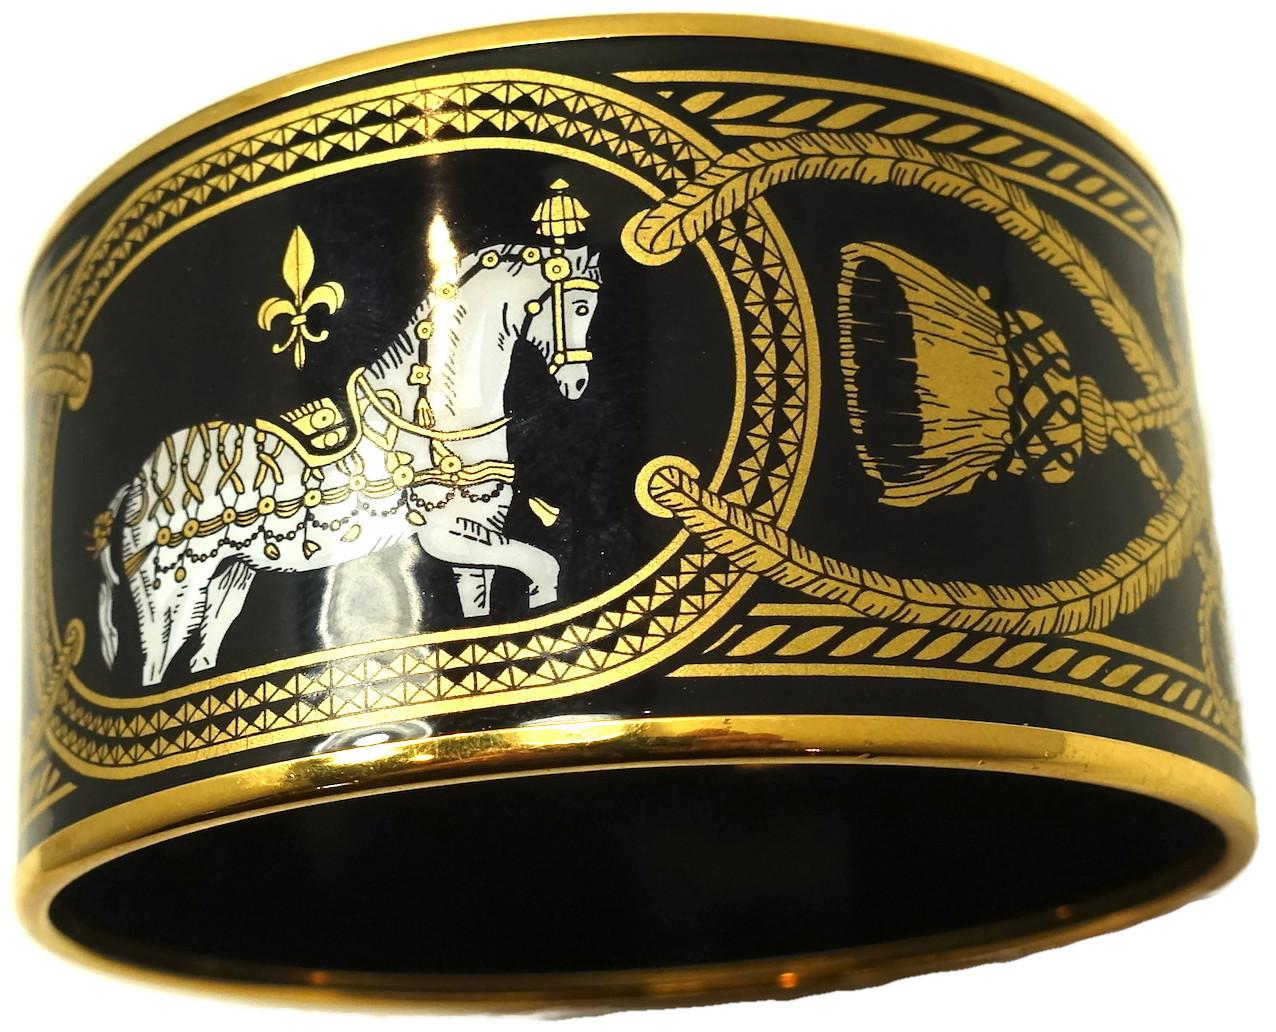 This vintage wide signed Hermes cuff bracelet has Hermes famous horse design and Fleur des Lis design on black, gold and white enameling. It has a gold tone trim.  In excellent condition, this bracelet measures 8-1/8” x 1-1/2” and is signed “Hermes